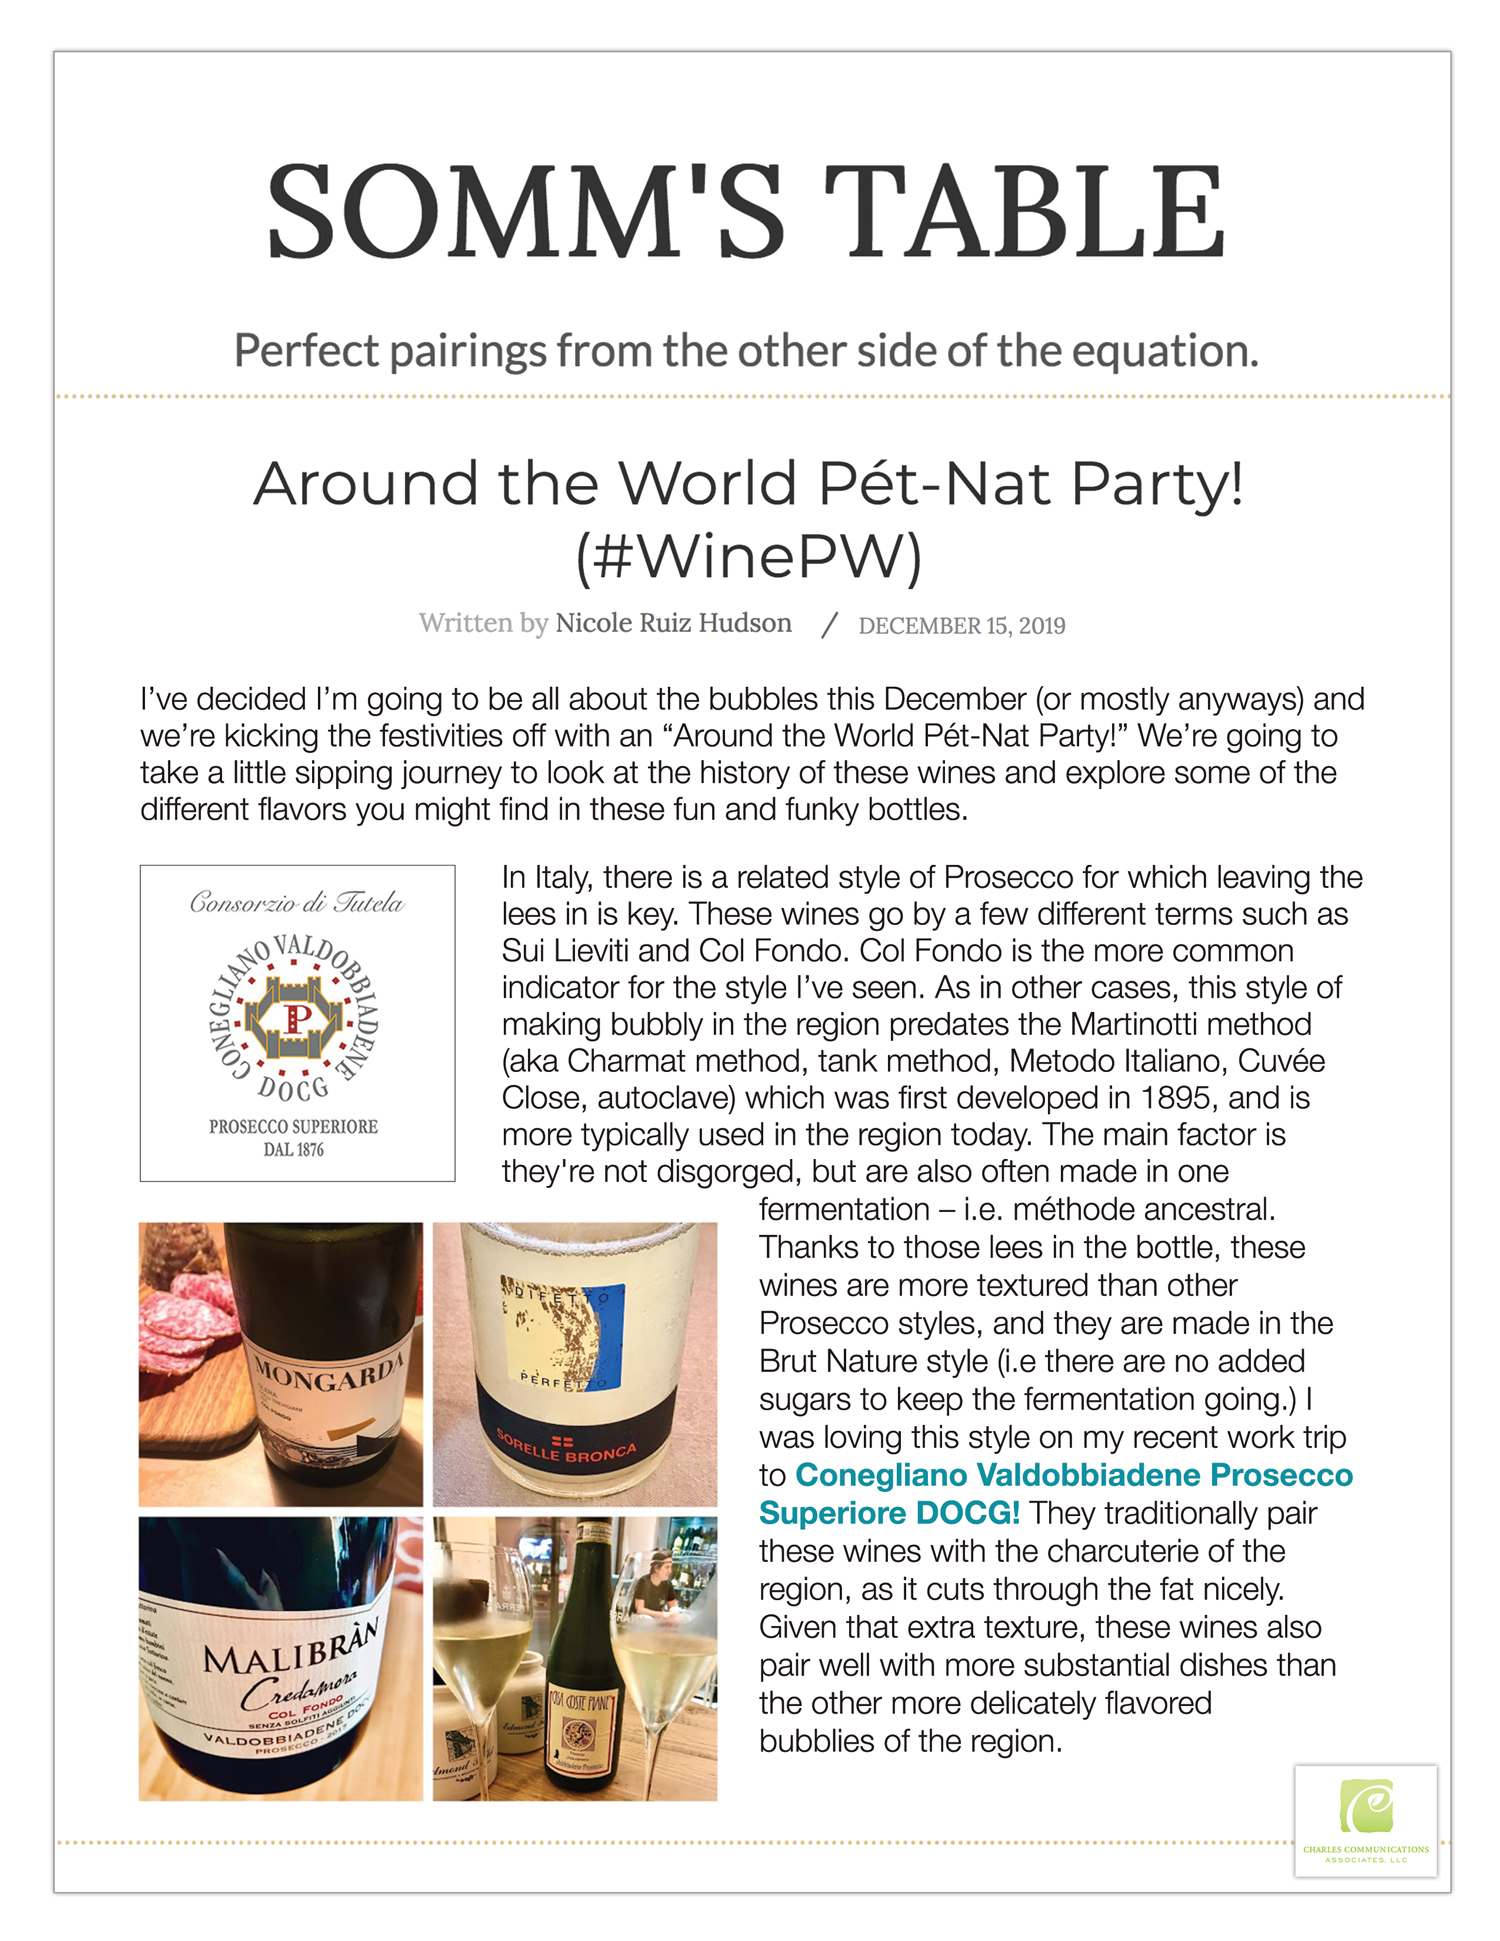 Somms Table